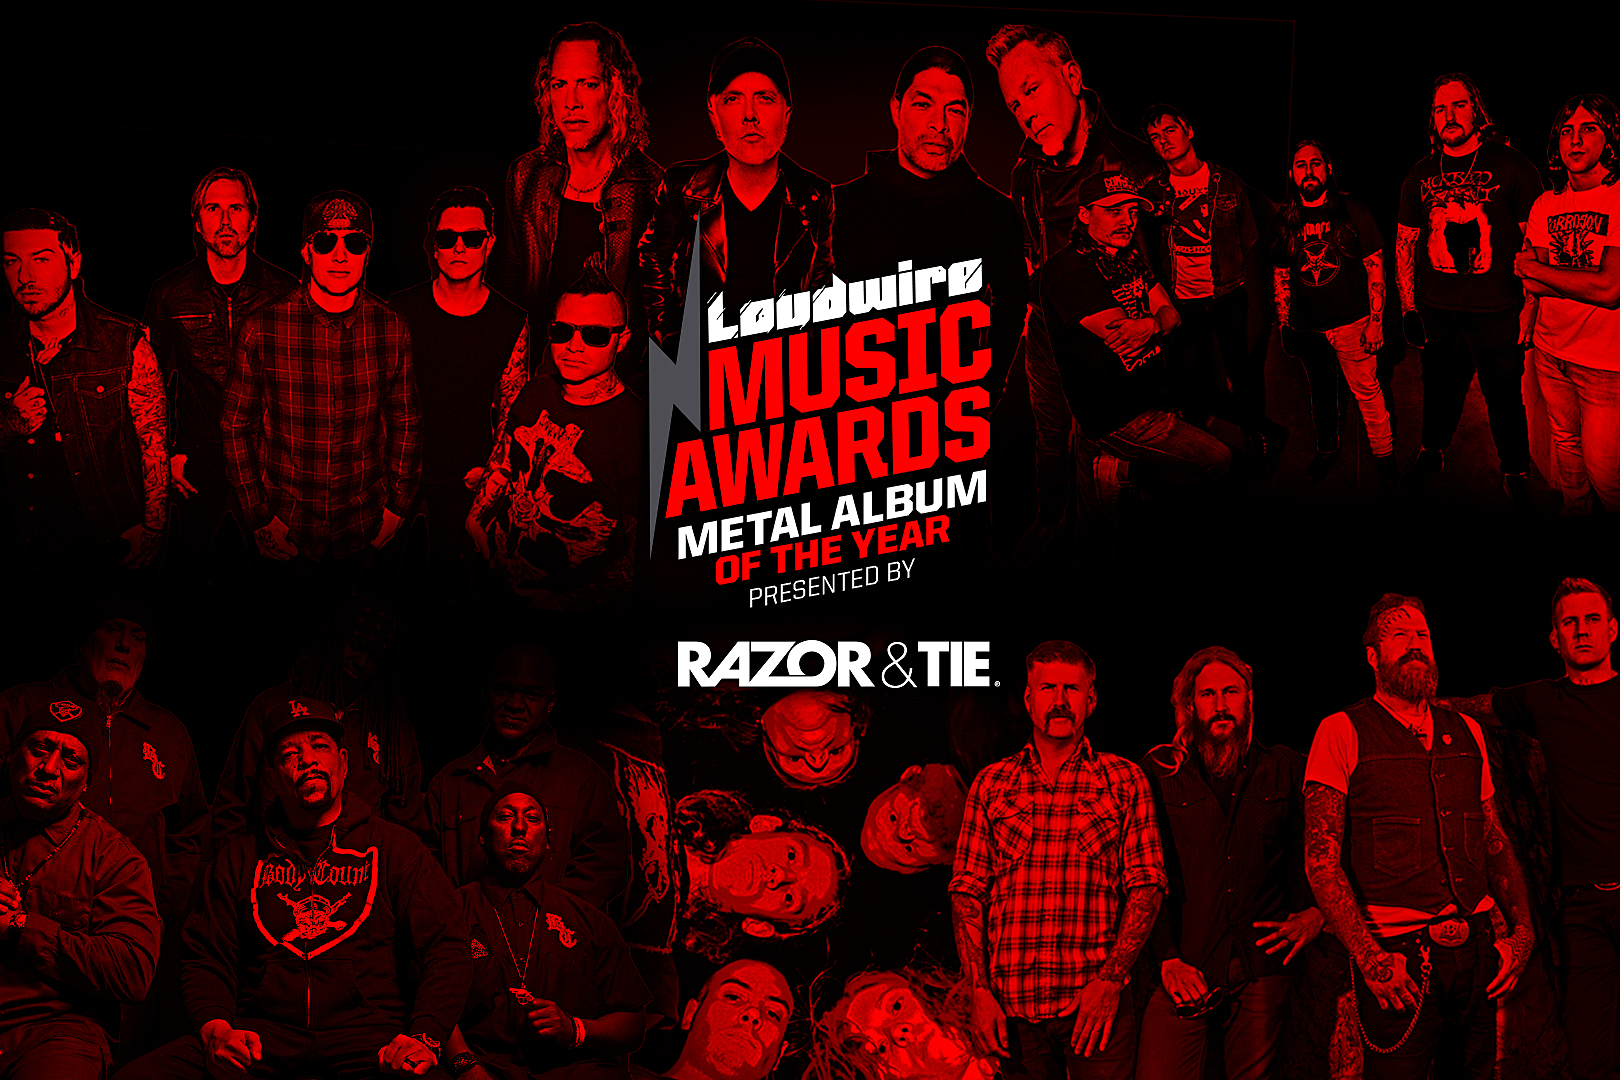 Vote for the Metal Album of the Year – 2017 Loudwire Music Awards